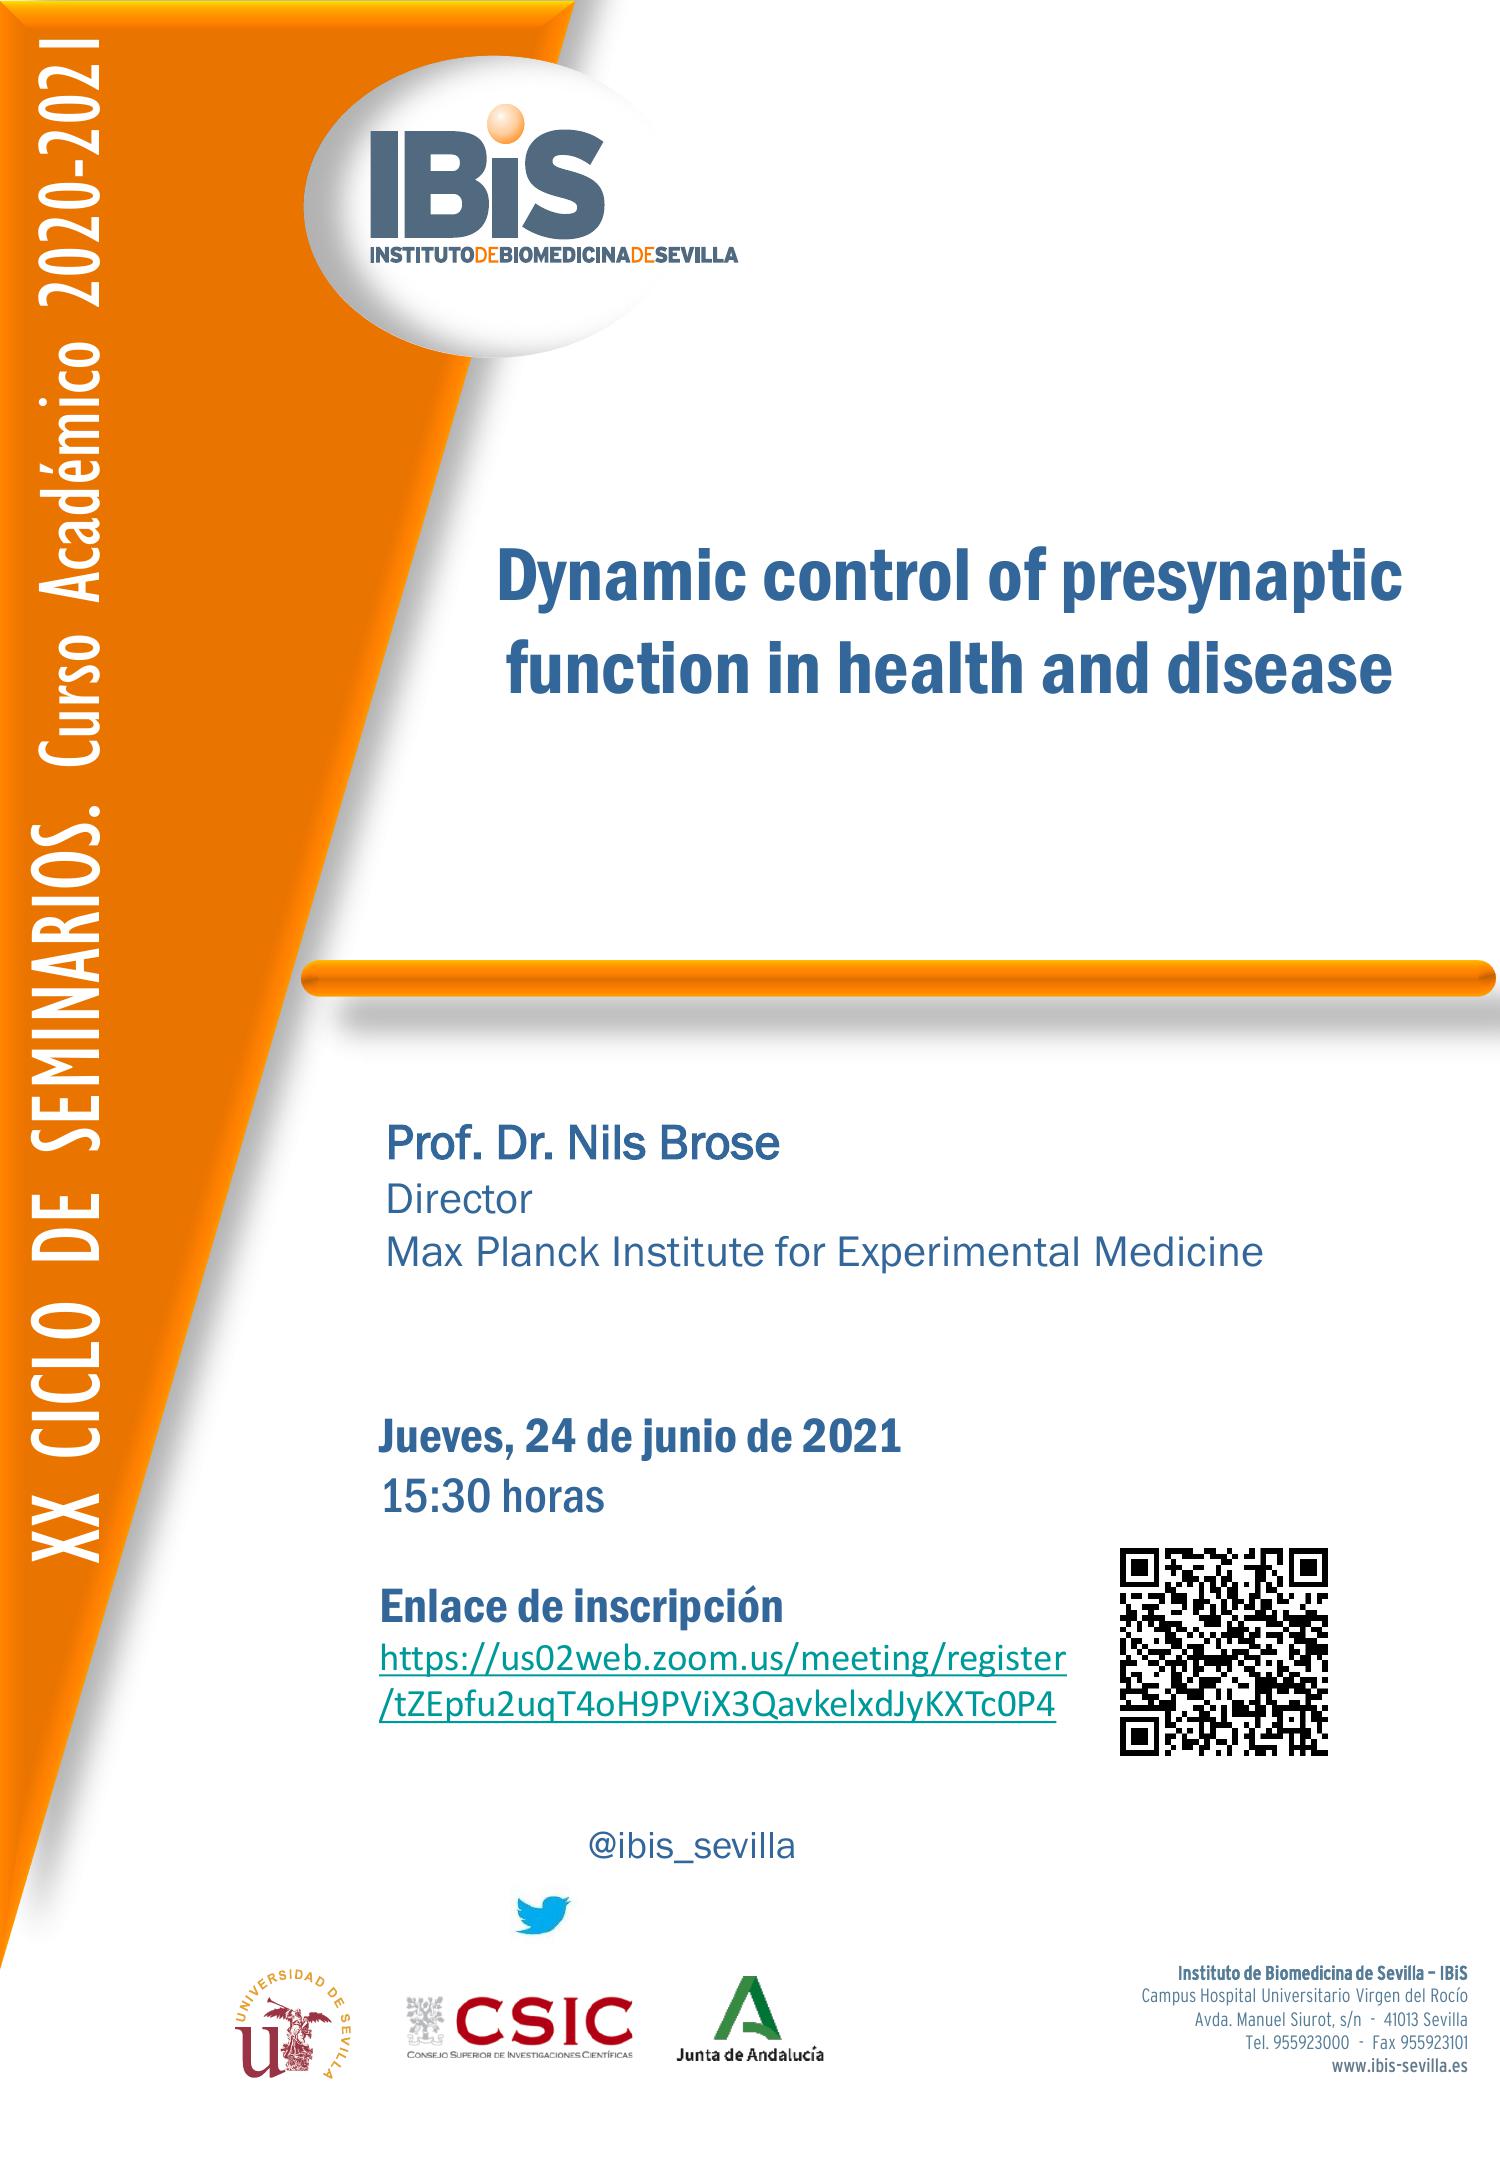 Poster: Dynamic control of presynaptic function in health and disease